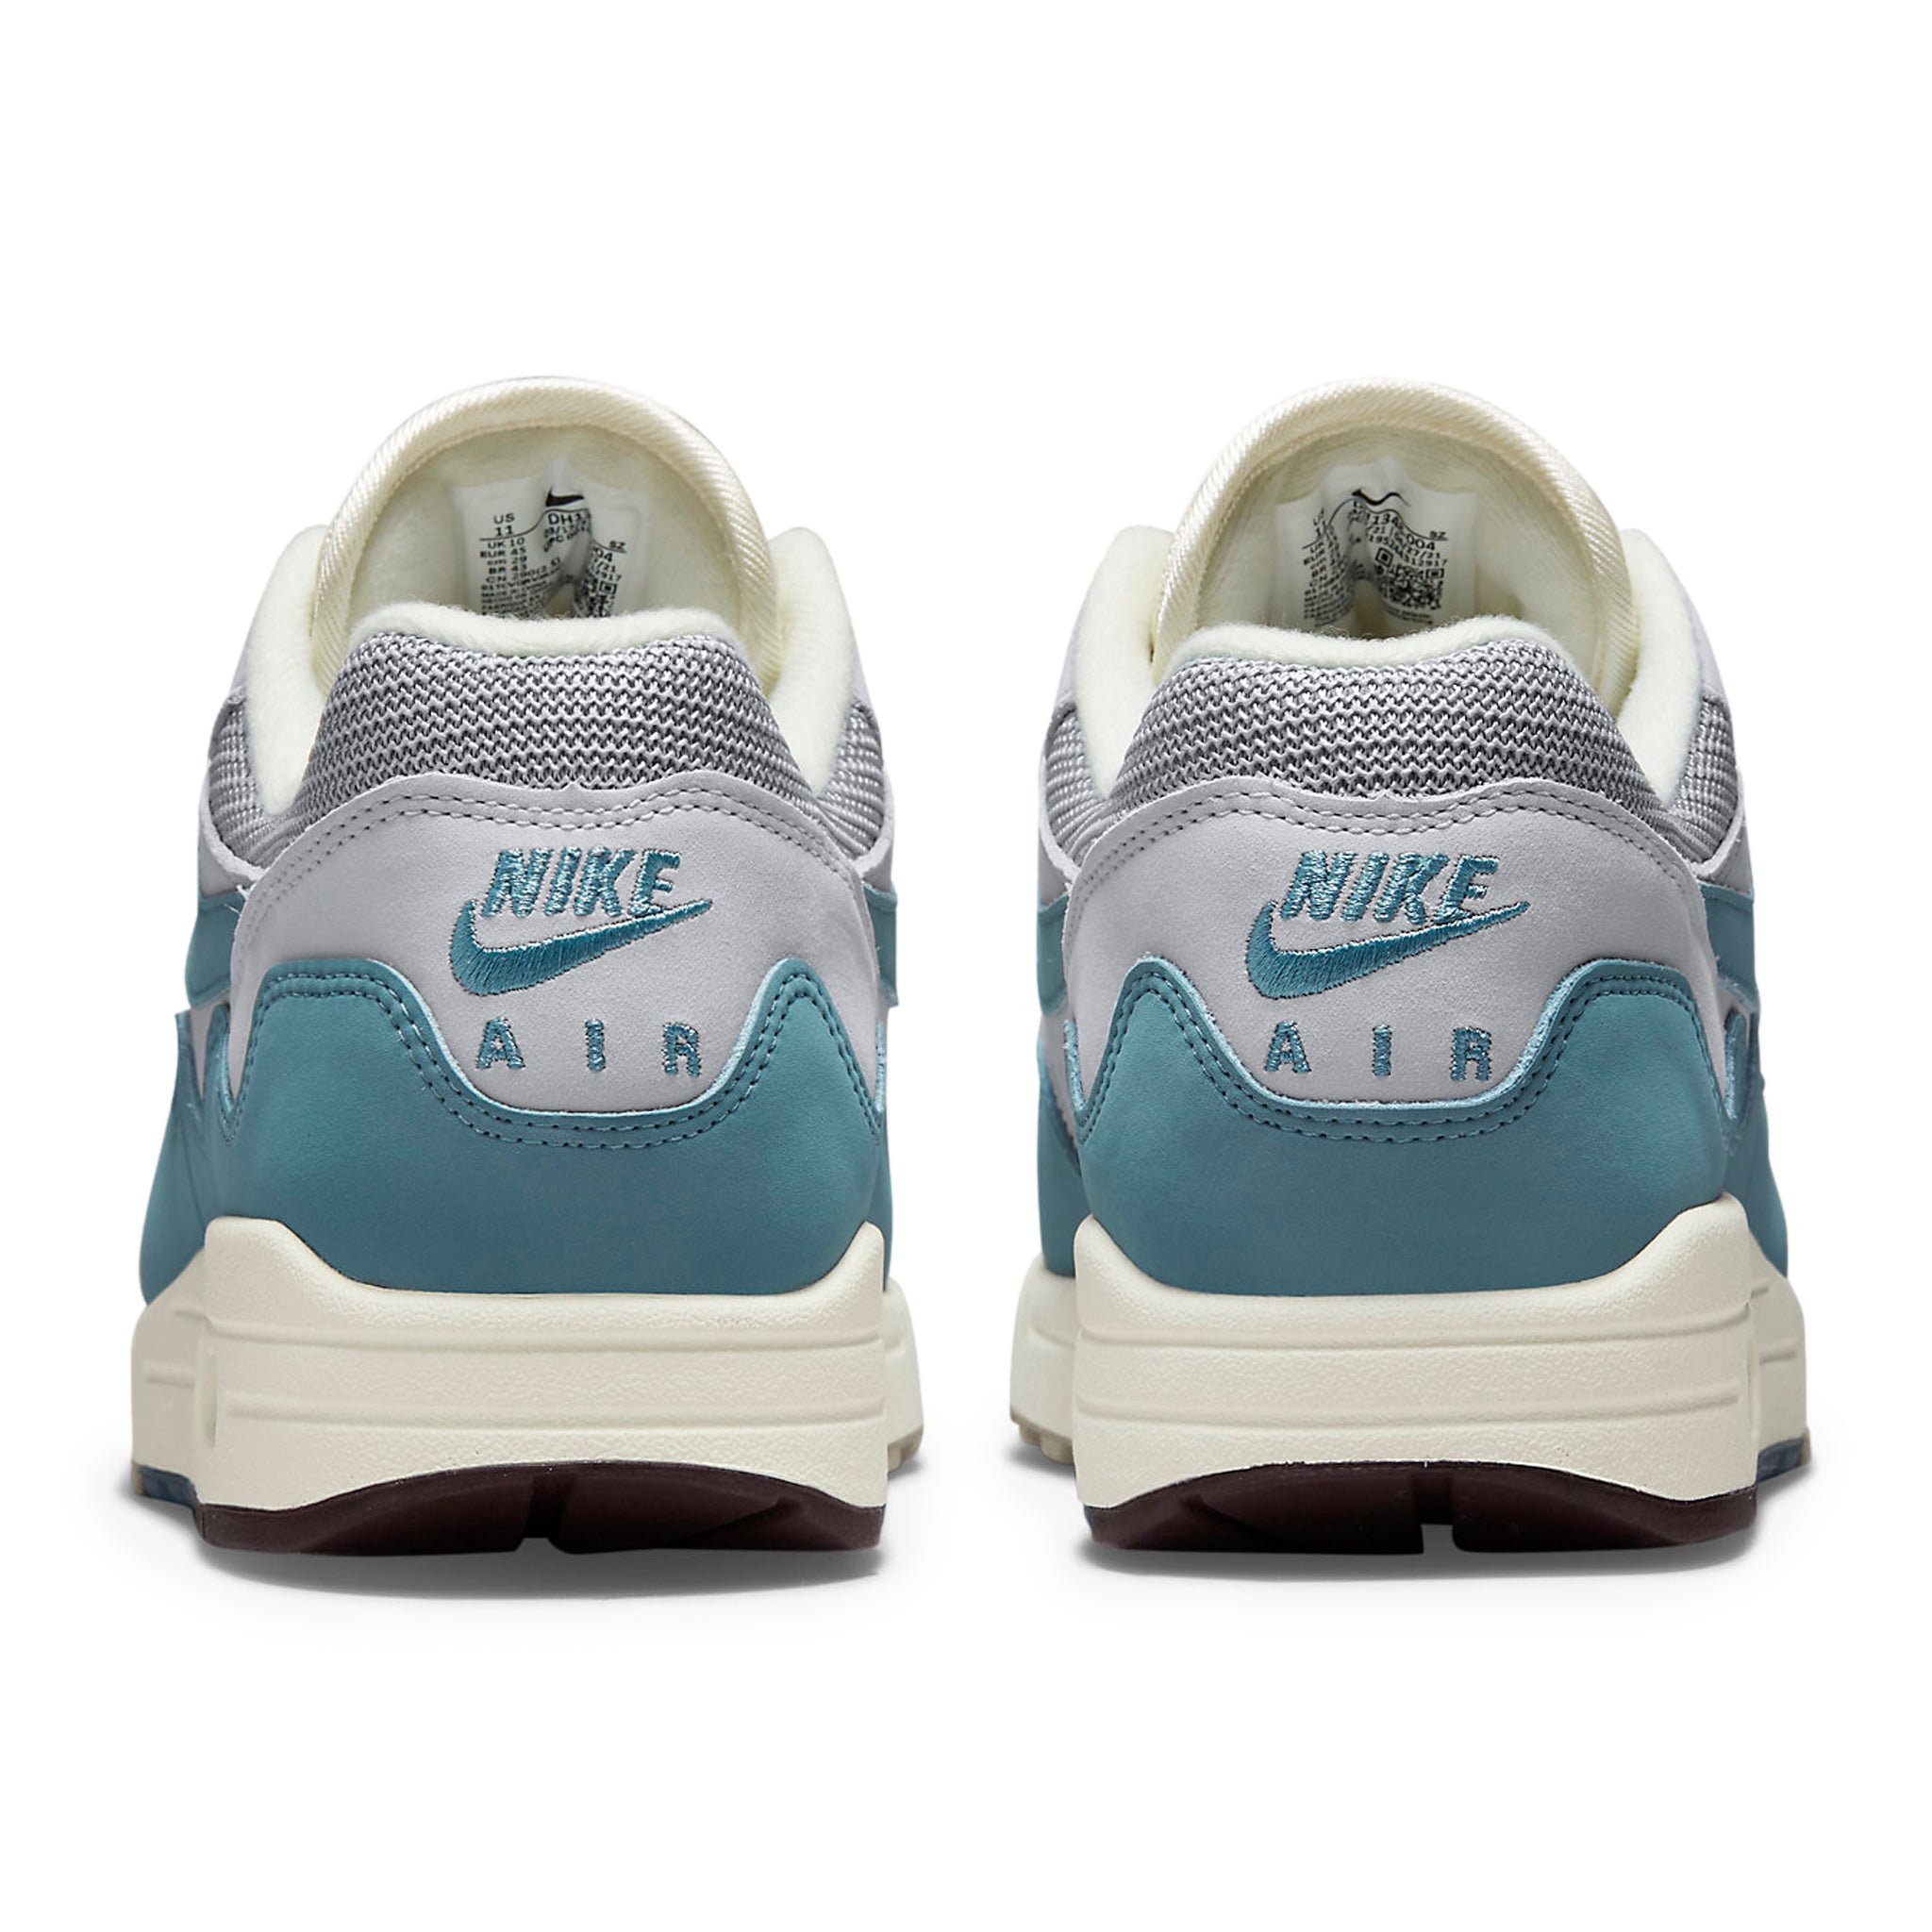 Heel view of Nike Air Max 1 Patta Waves Noise Aqua (With Bracelet) DH1348-004